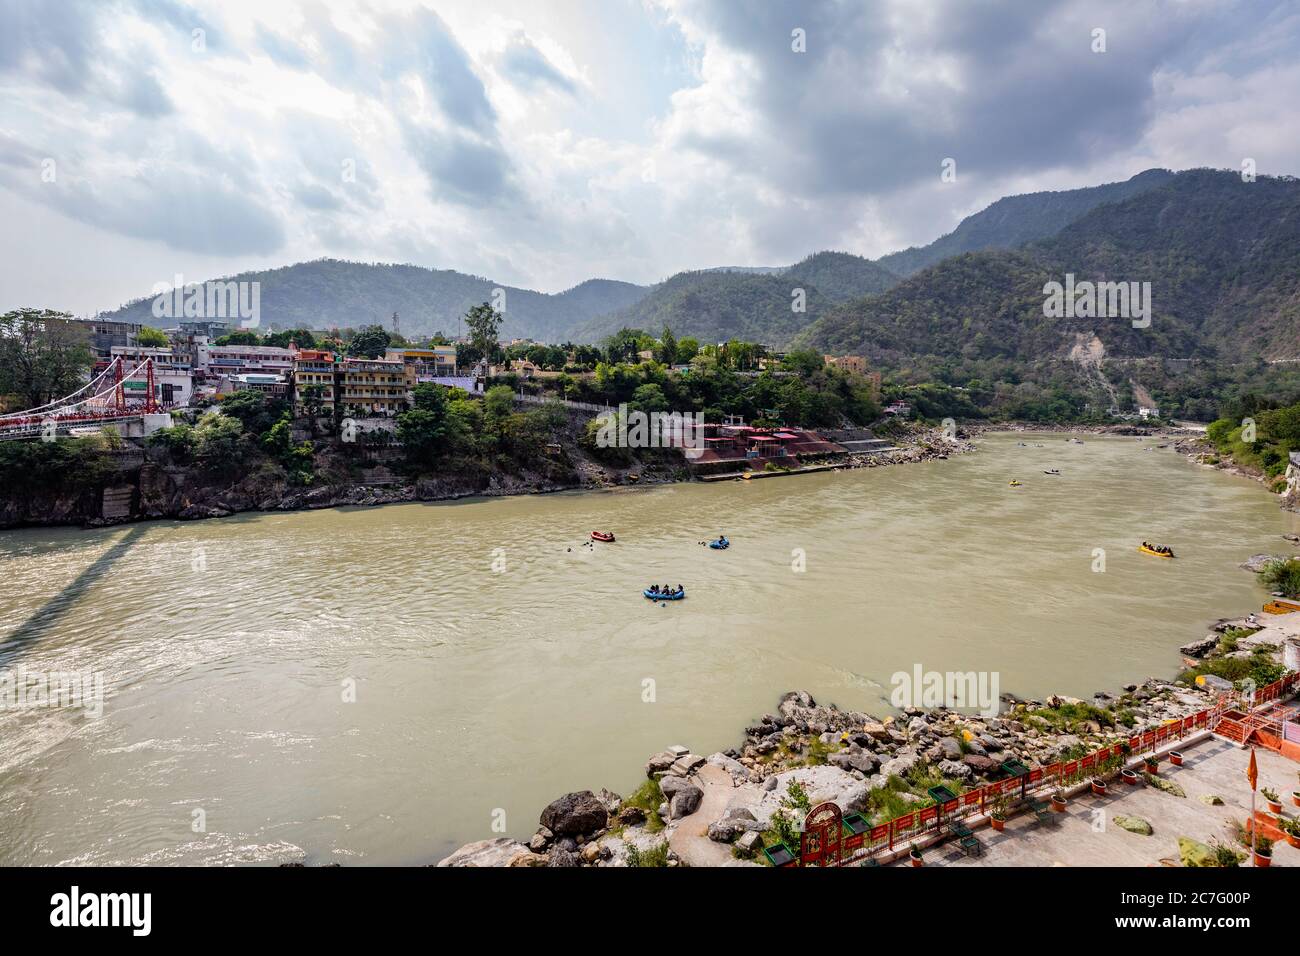 A wide angle view of the River Ganges in the holy town of Rishikesh in northern India Stock Photo